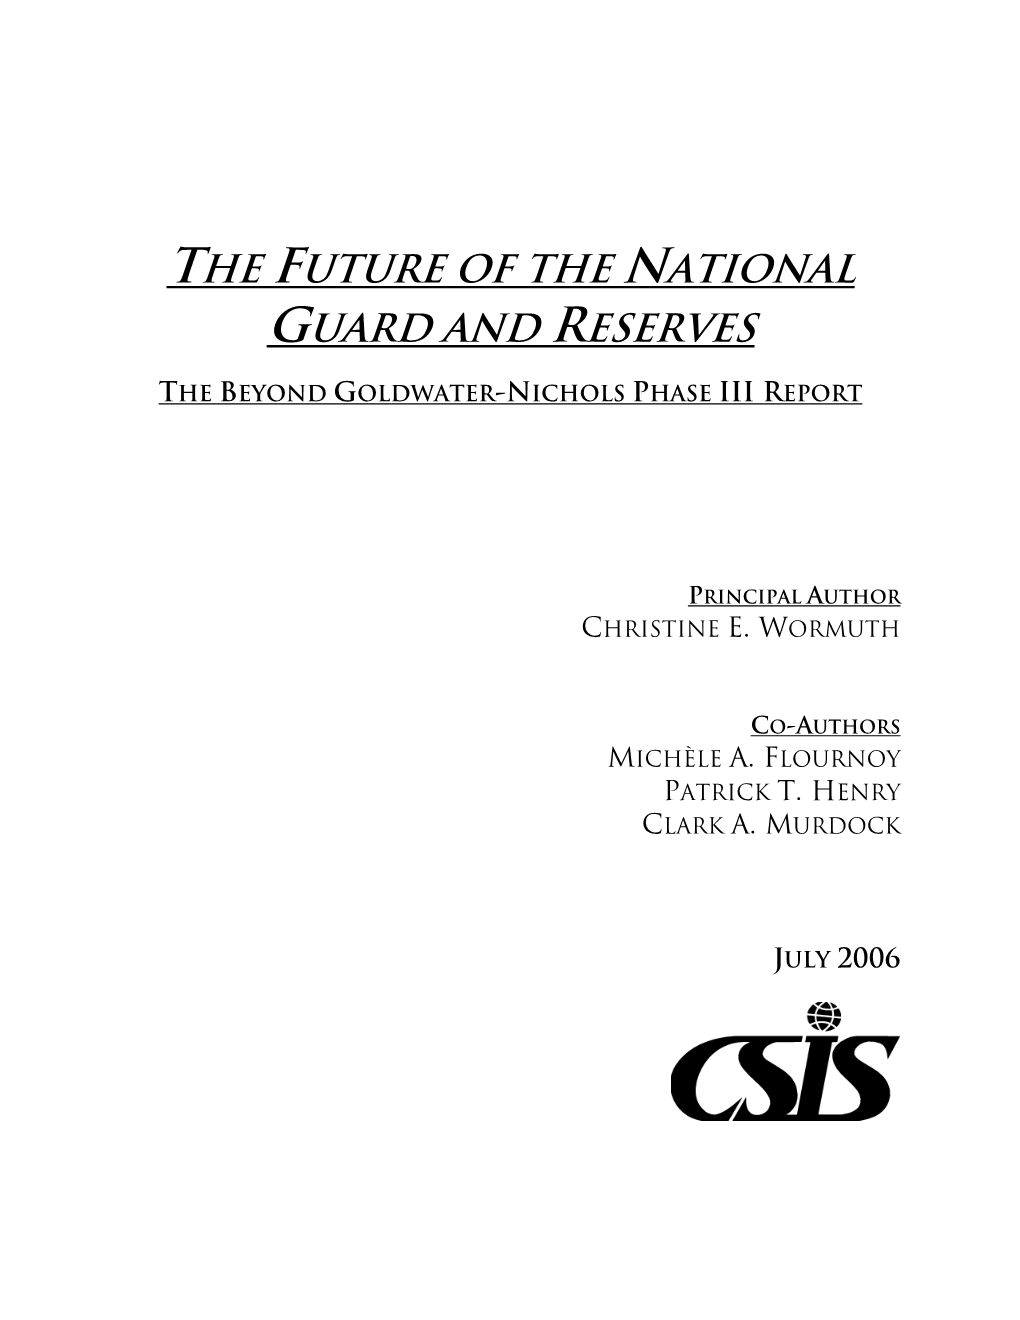 The Future of the National Guard and Reserves